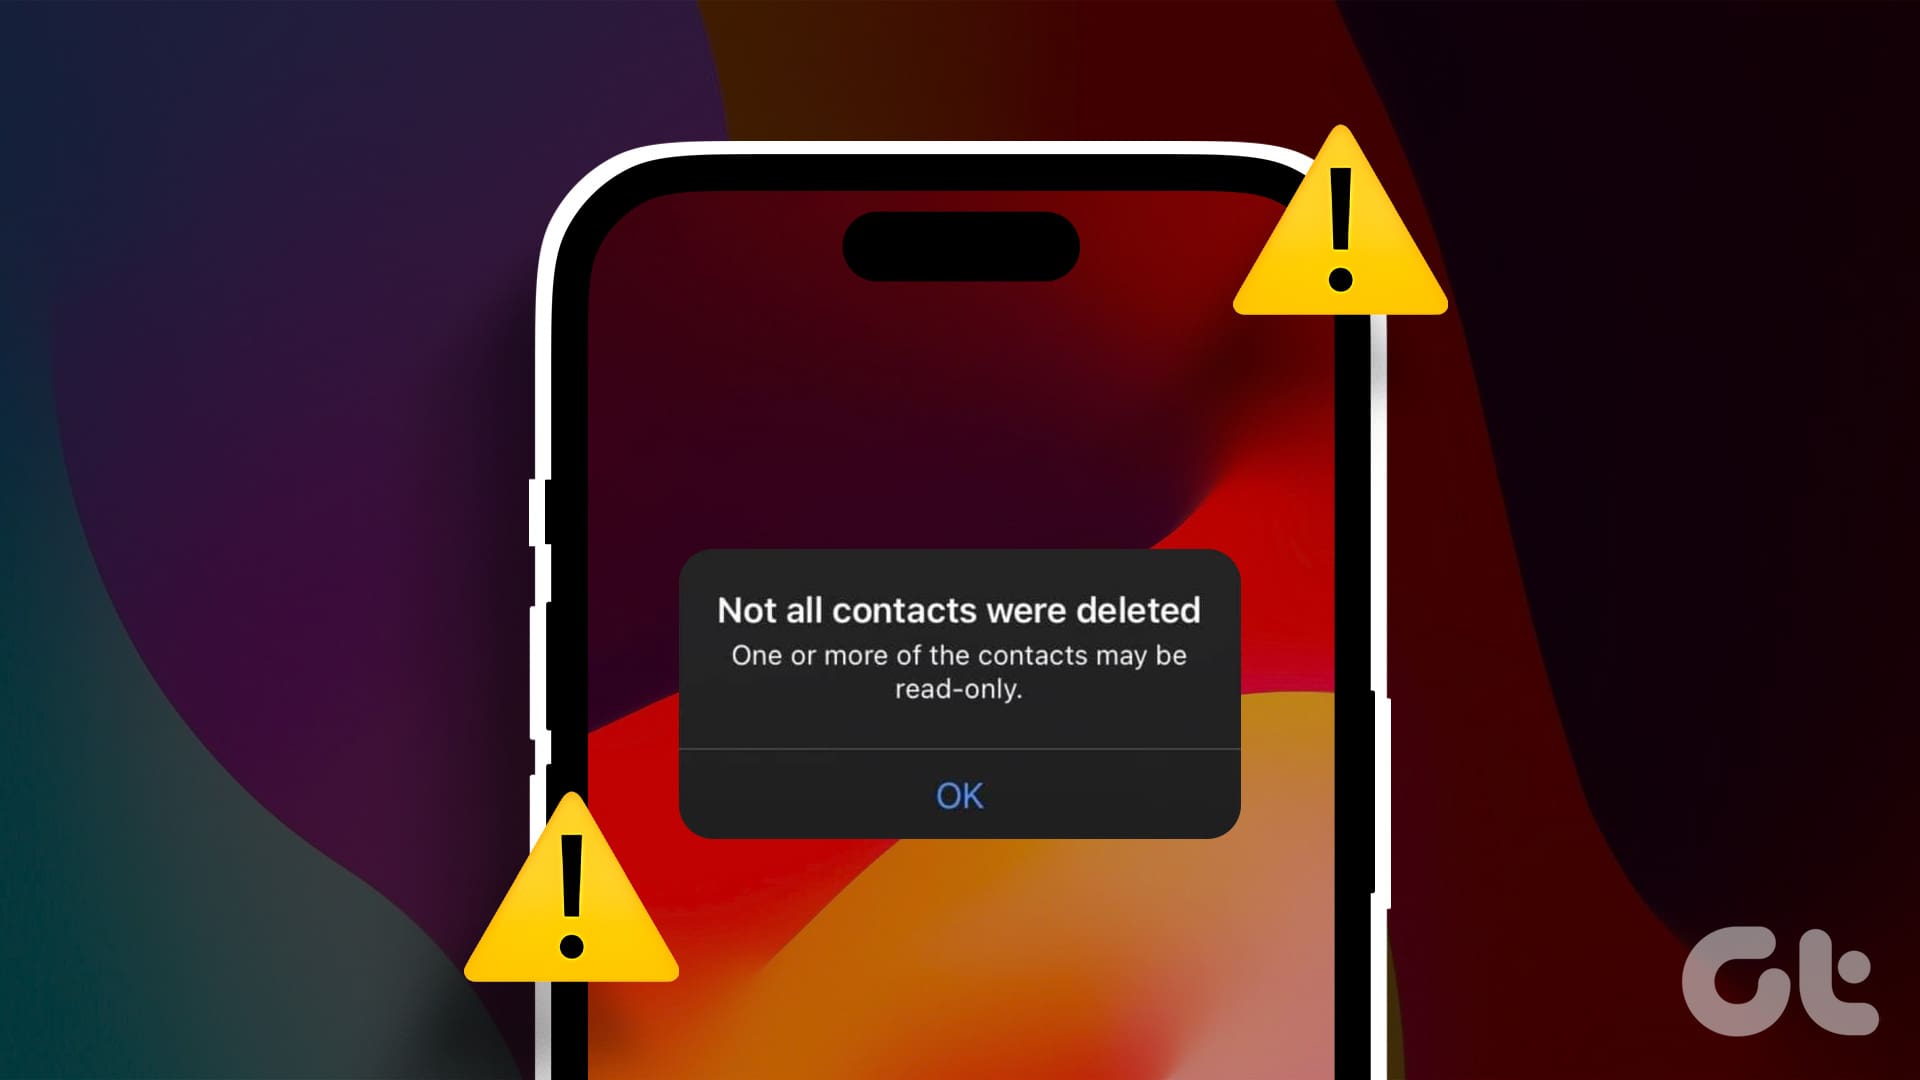 Top Fixes for ‘Not All Contacts Were Deleted Error on iPhone